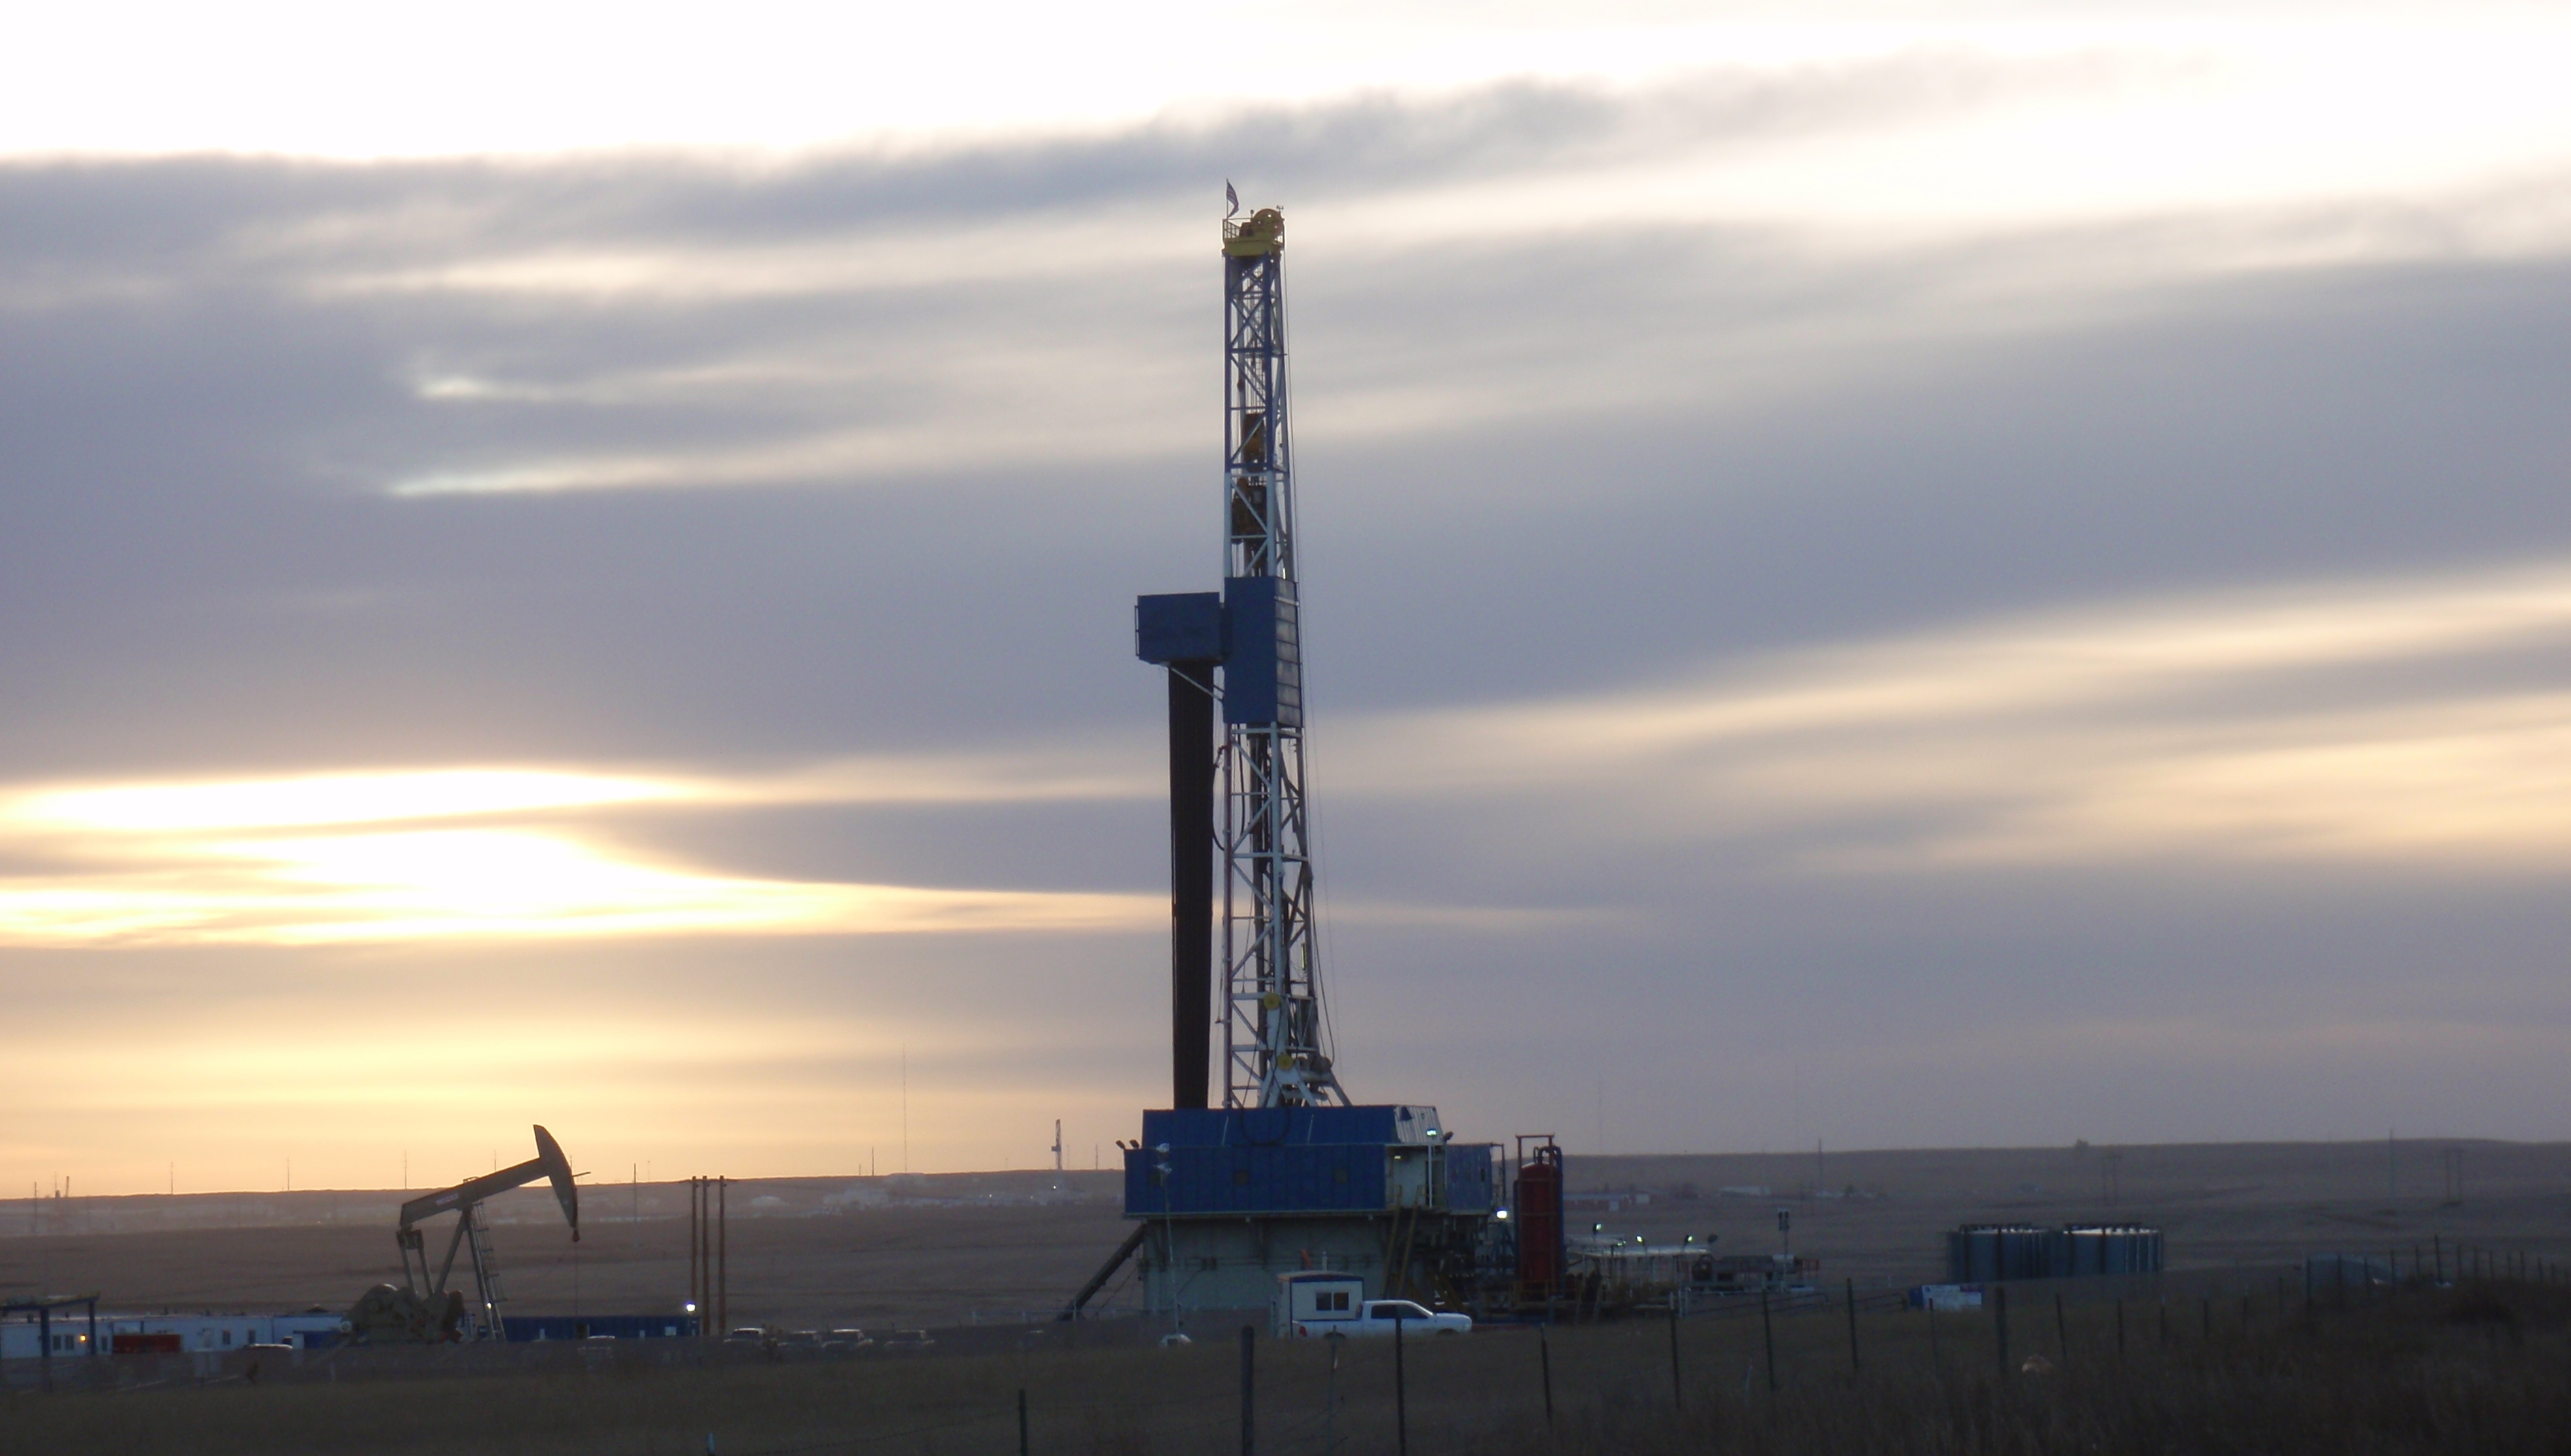 A new well is likely to produce about a million barrels of oil, compared to half a million from a well drilled several years ago. Photo by James Ulvog.